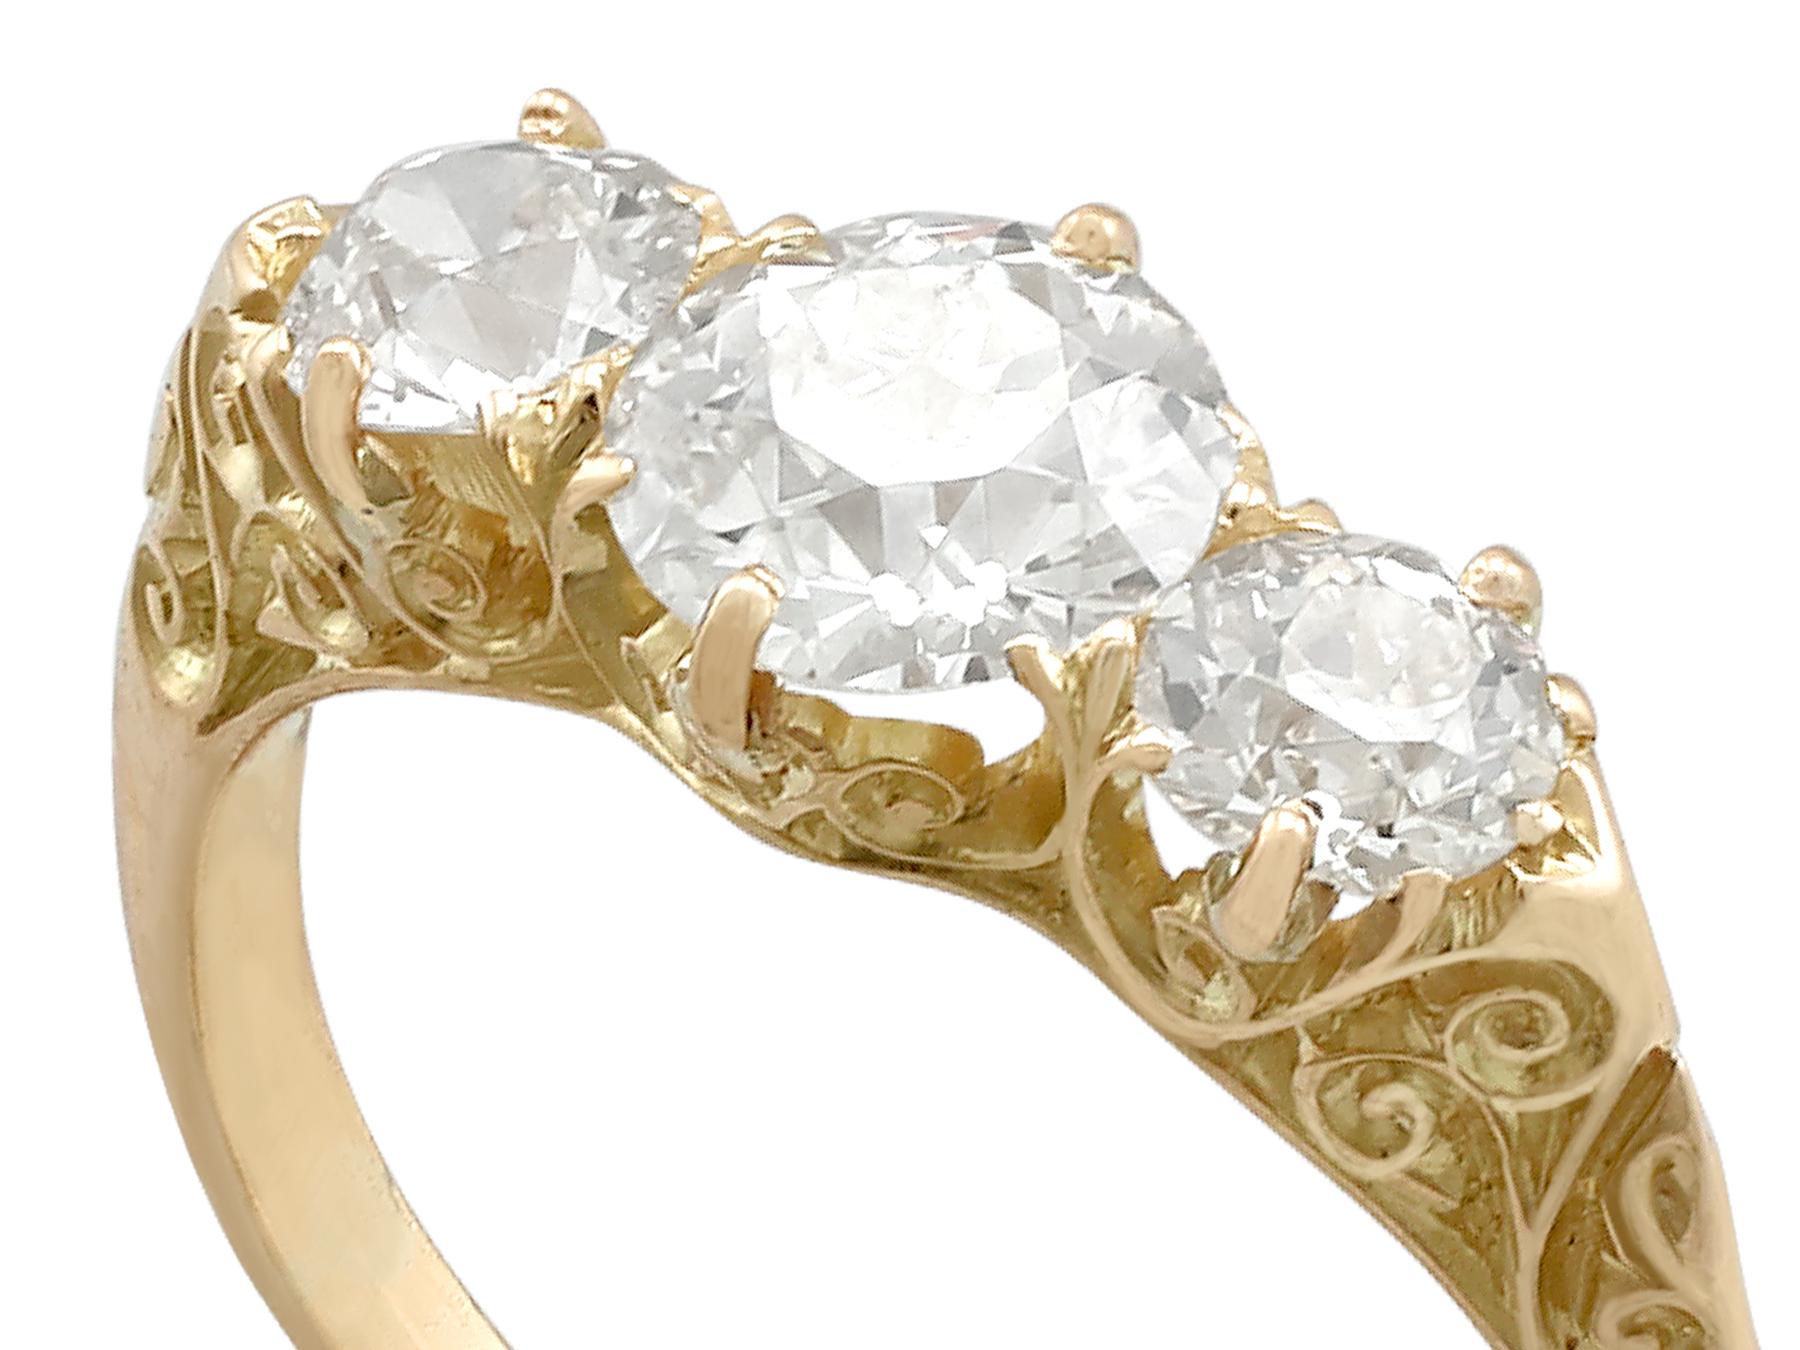 A stunning antique 2.16 carat diamond and 18 carat yellow gold three stone dress ring; part of our diverse antique jewellery and estate jewelry collections.

This stunning, fine and impressive antique three stone ring has been crafted in 18 ct